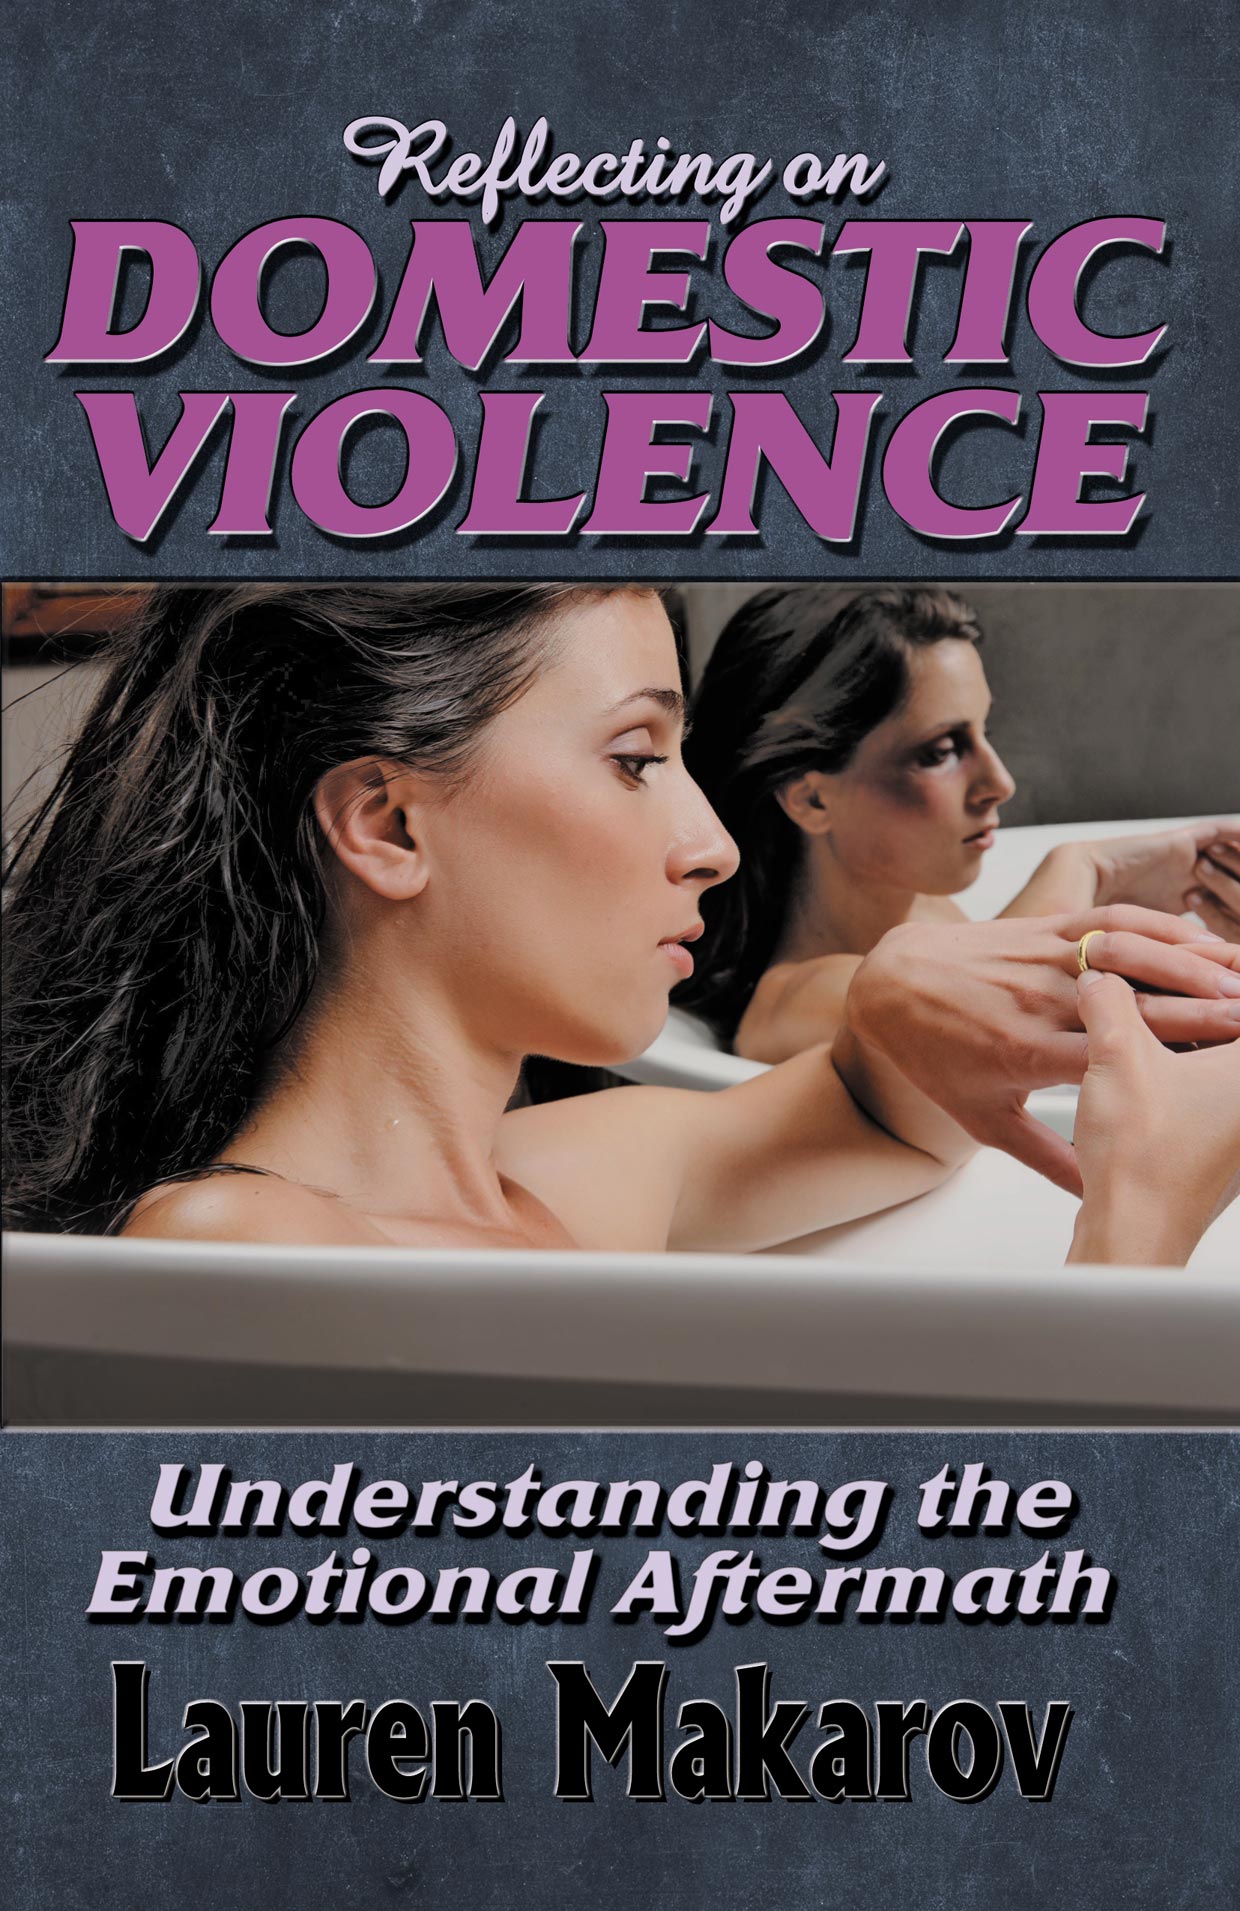 Reflecting on Domestic Violence: Understanding the Emotional Aftermath